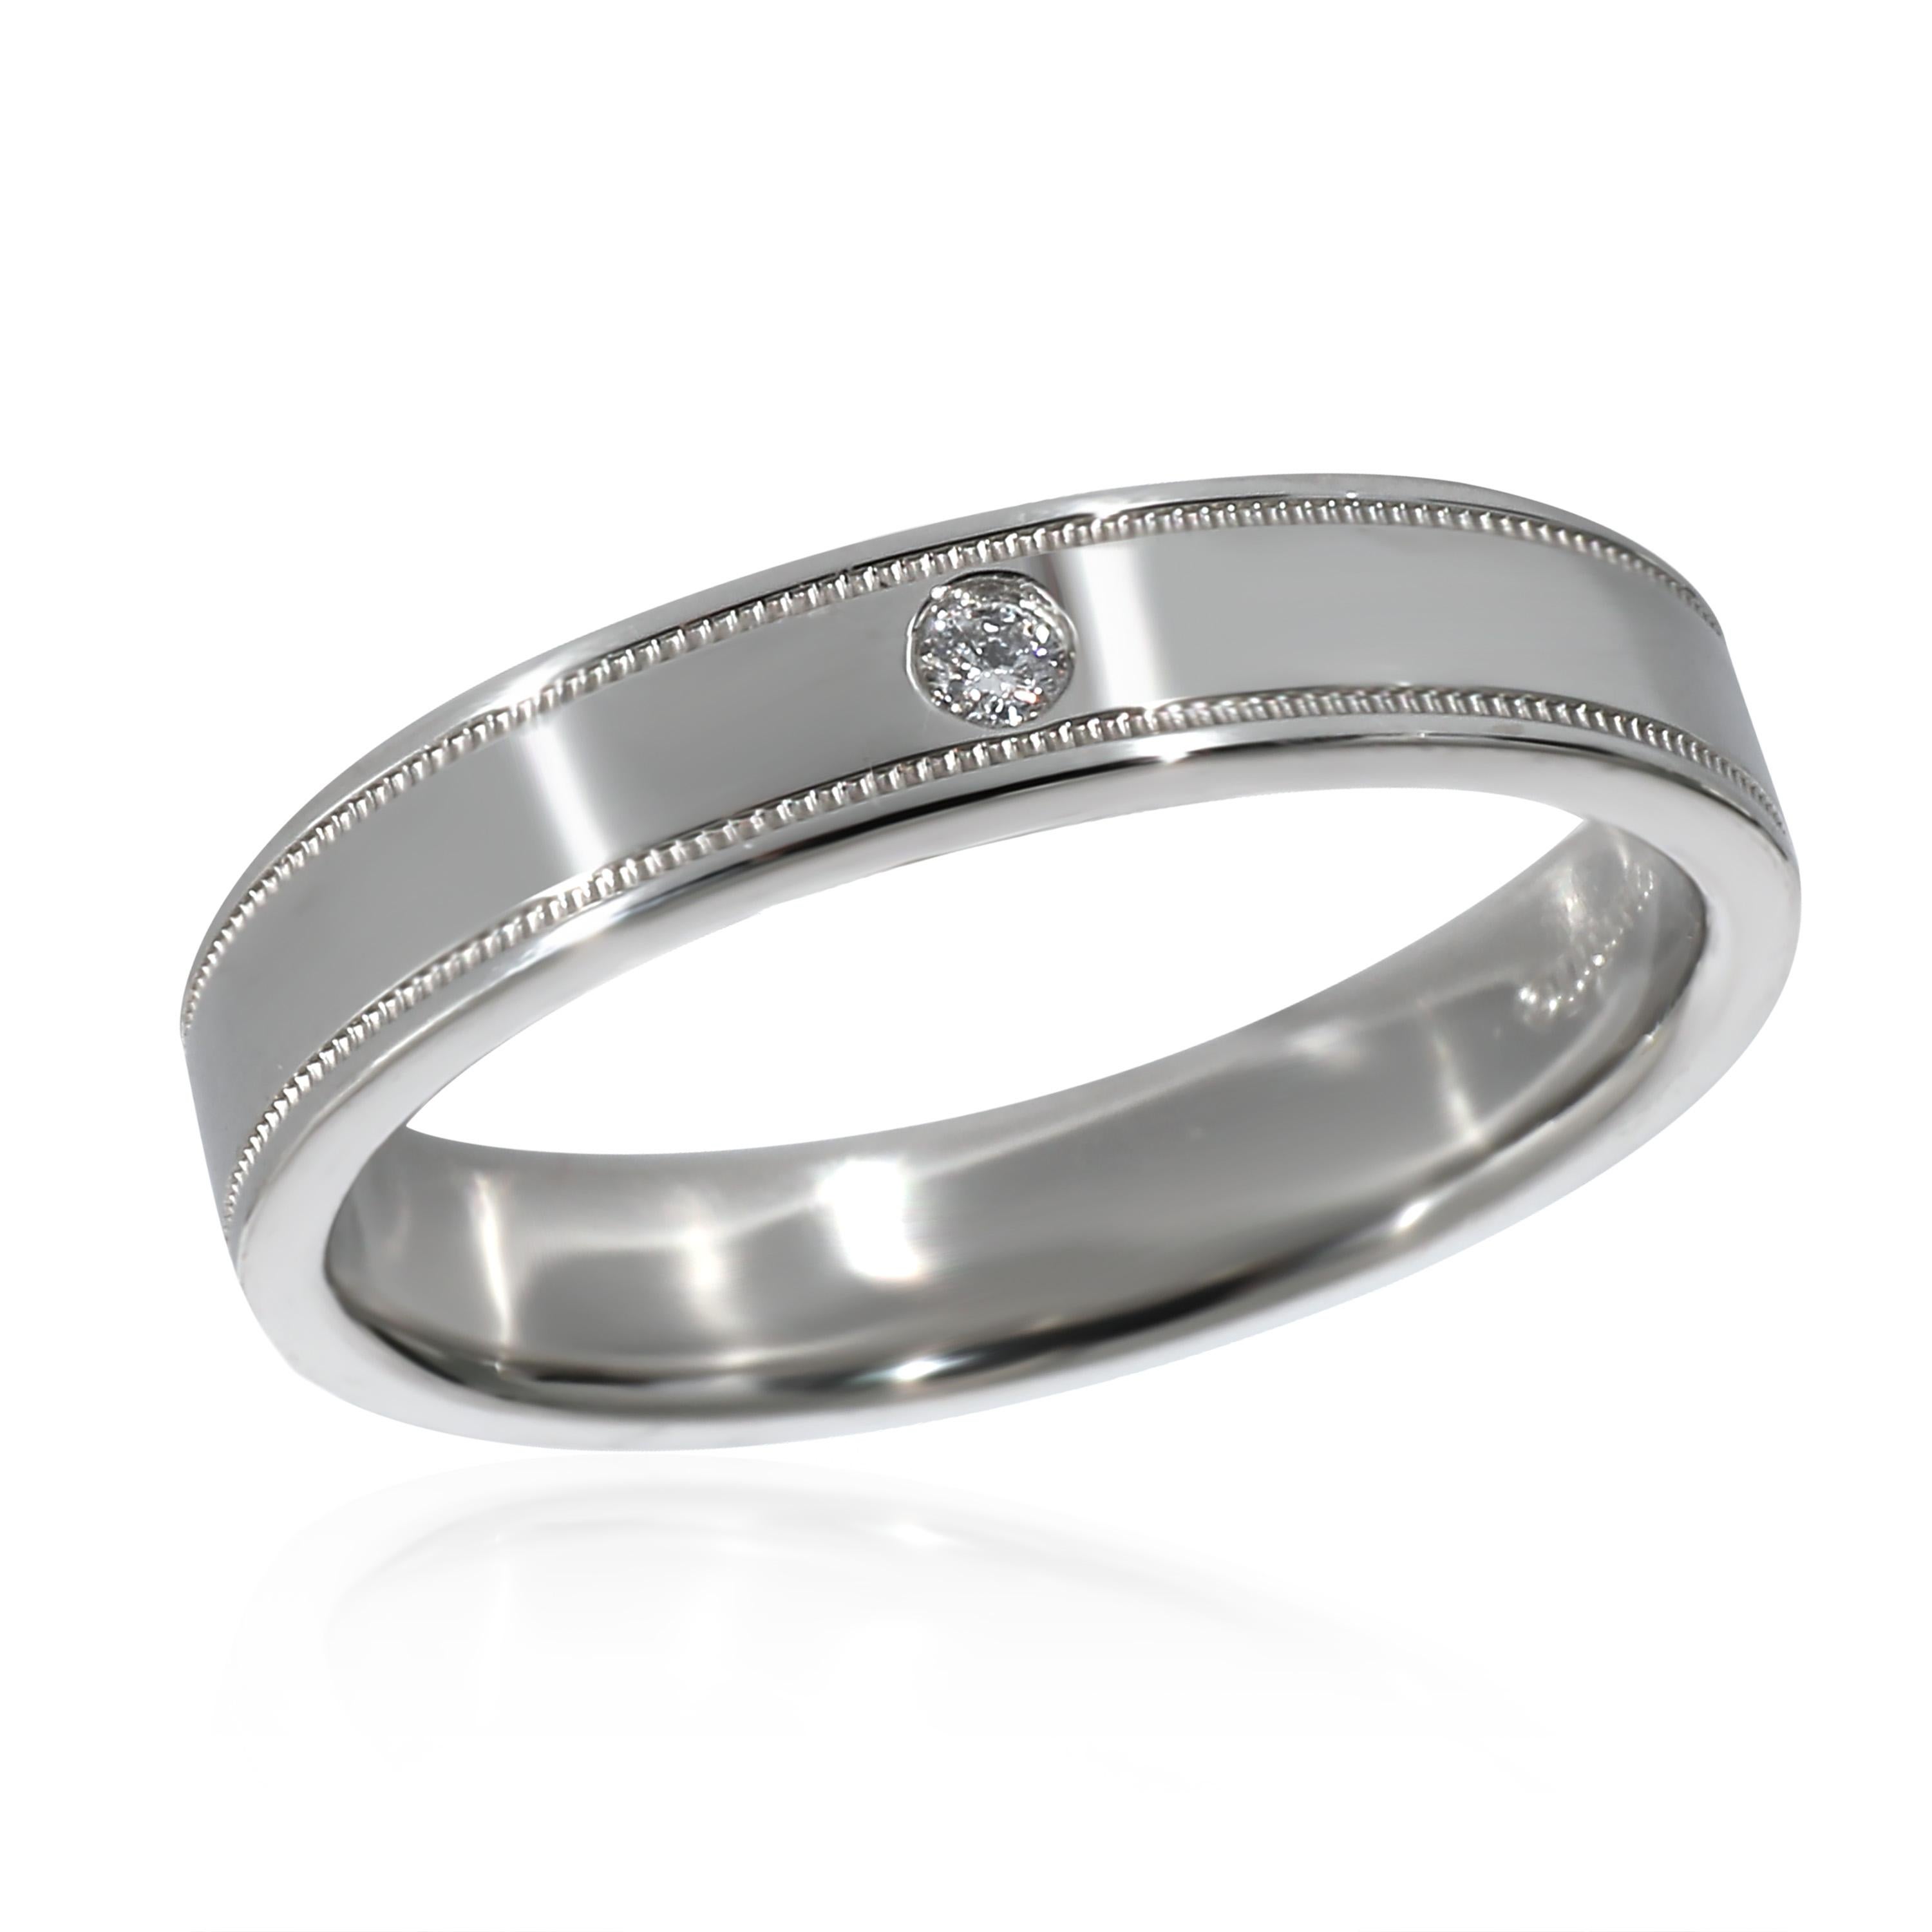 Tiffany & Co. Together Double Migrain Diamond Band in Platinum 0.01 CTW In Excellent Condition For Sale In New York, NY